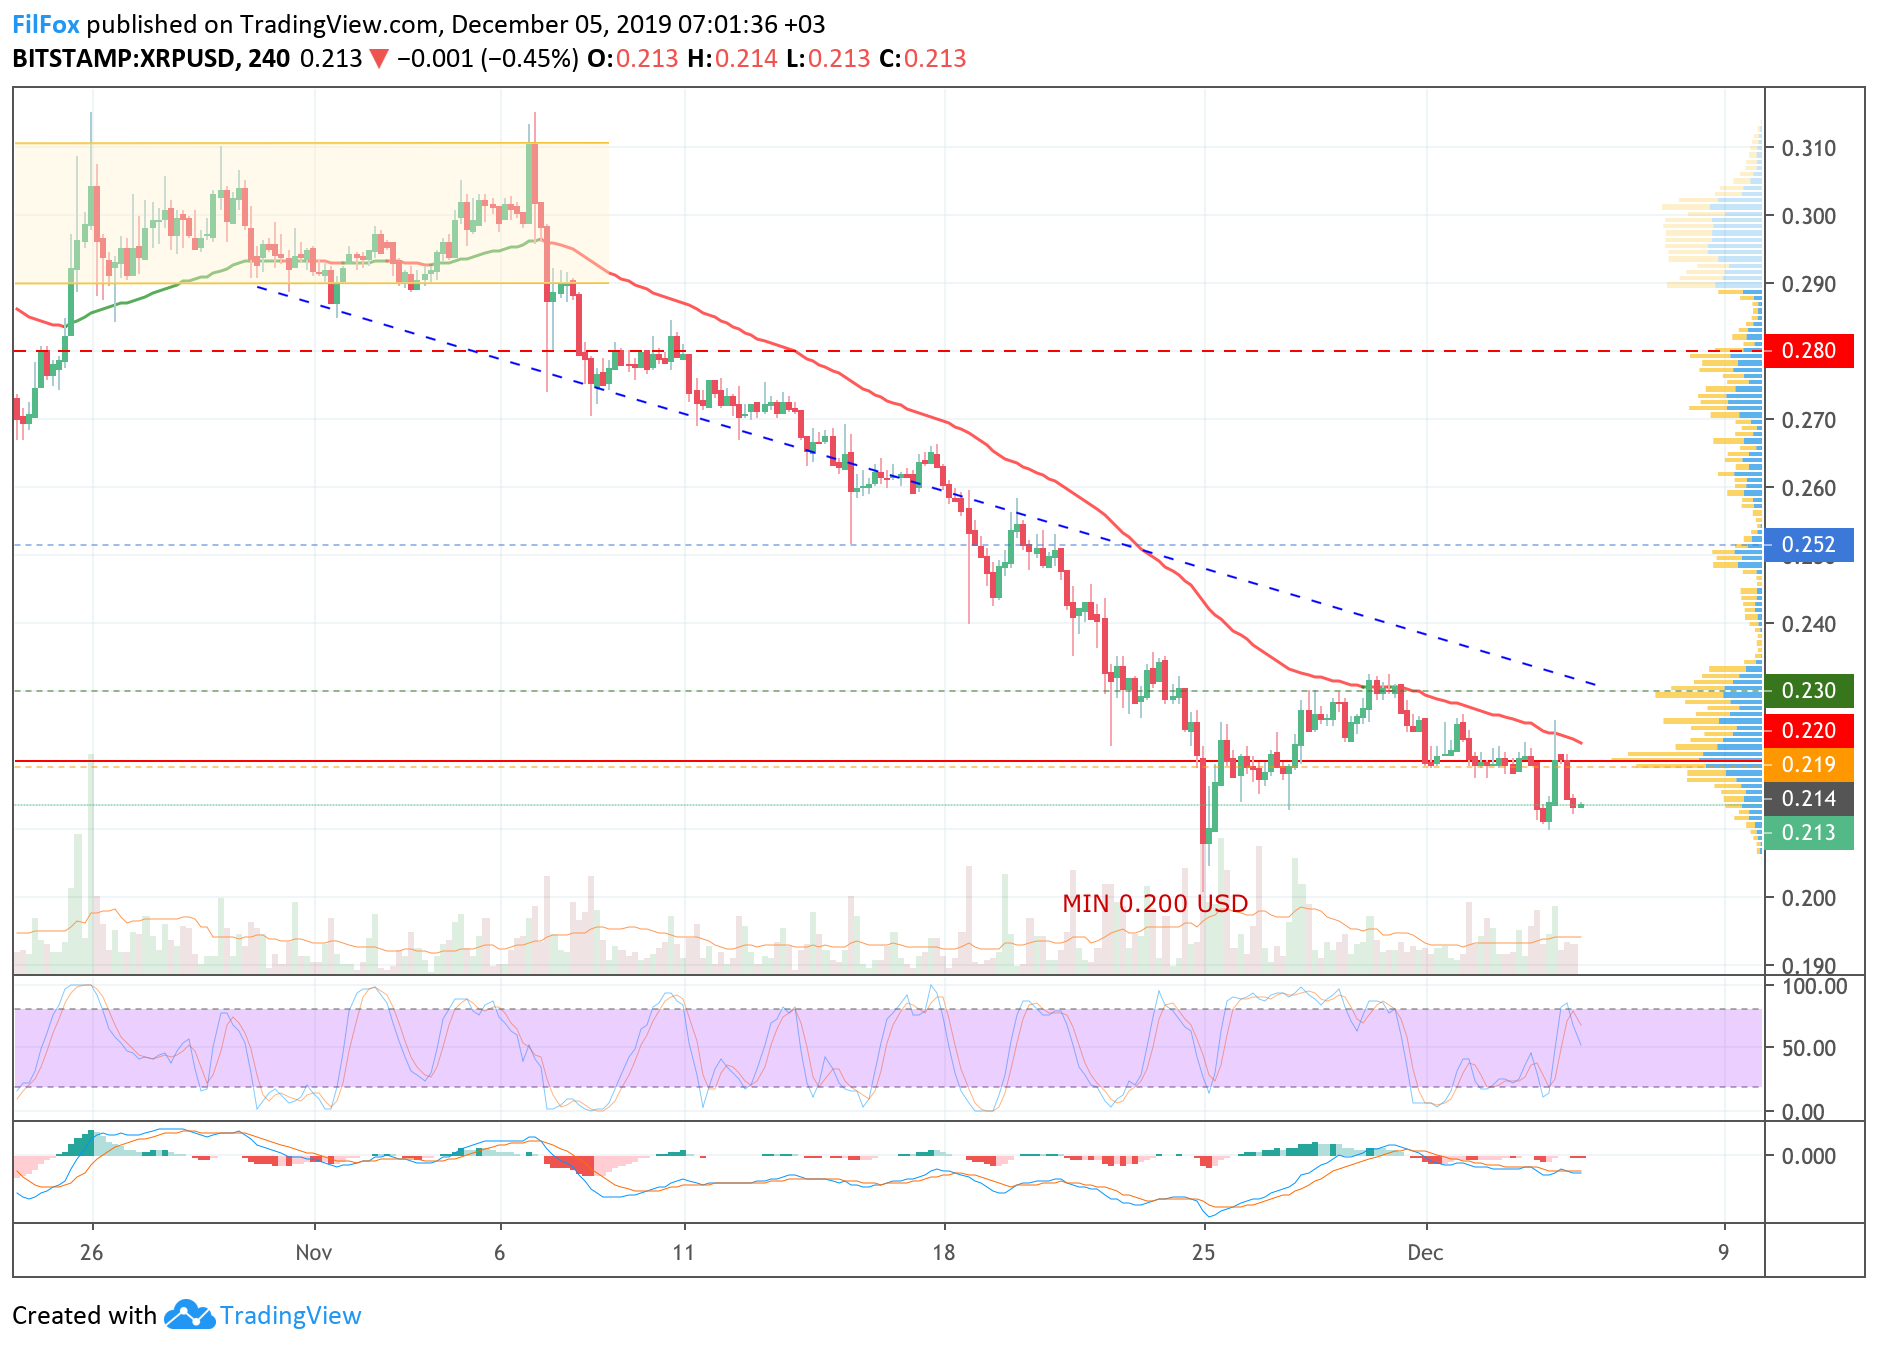 Analysis of cryptocurrency pairs BTC / USD, ETH / USD and XRP / USD on 12/05/2019